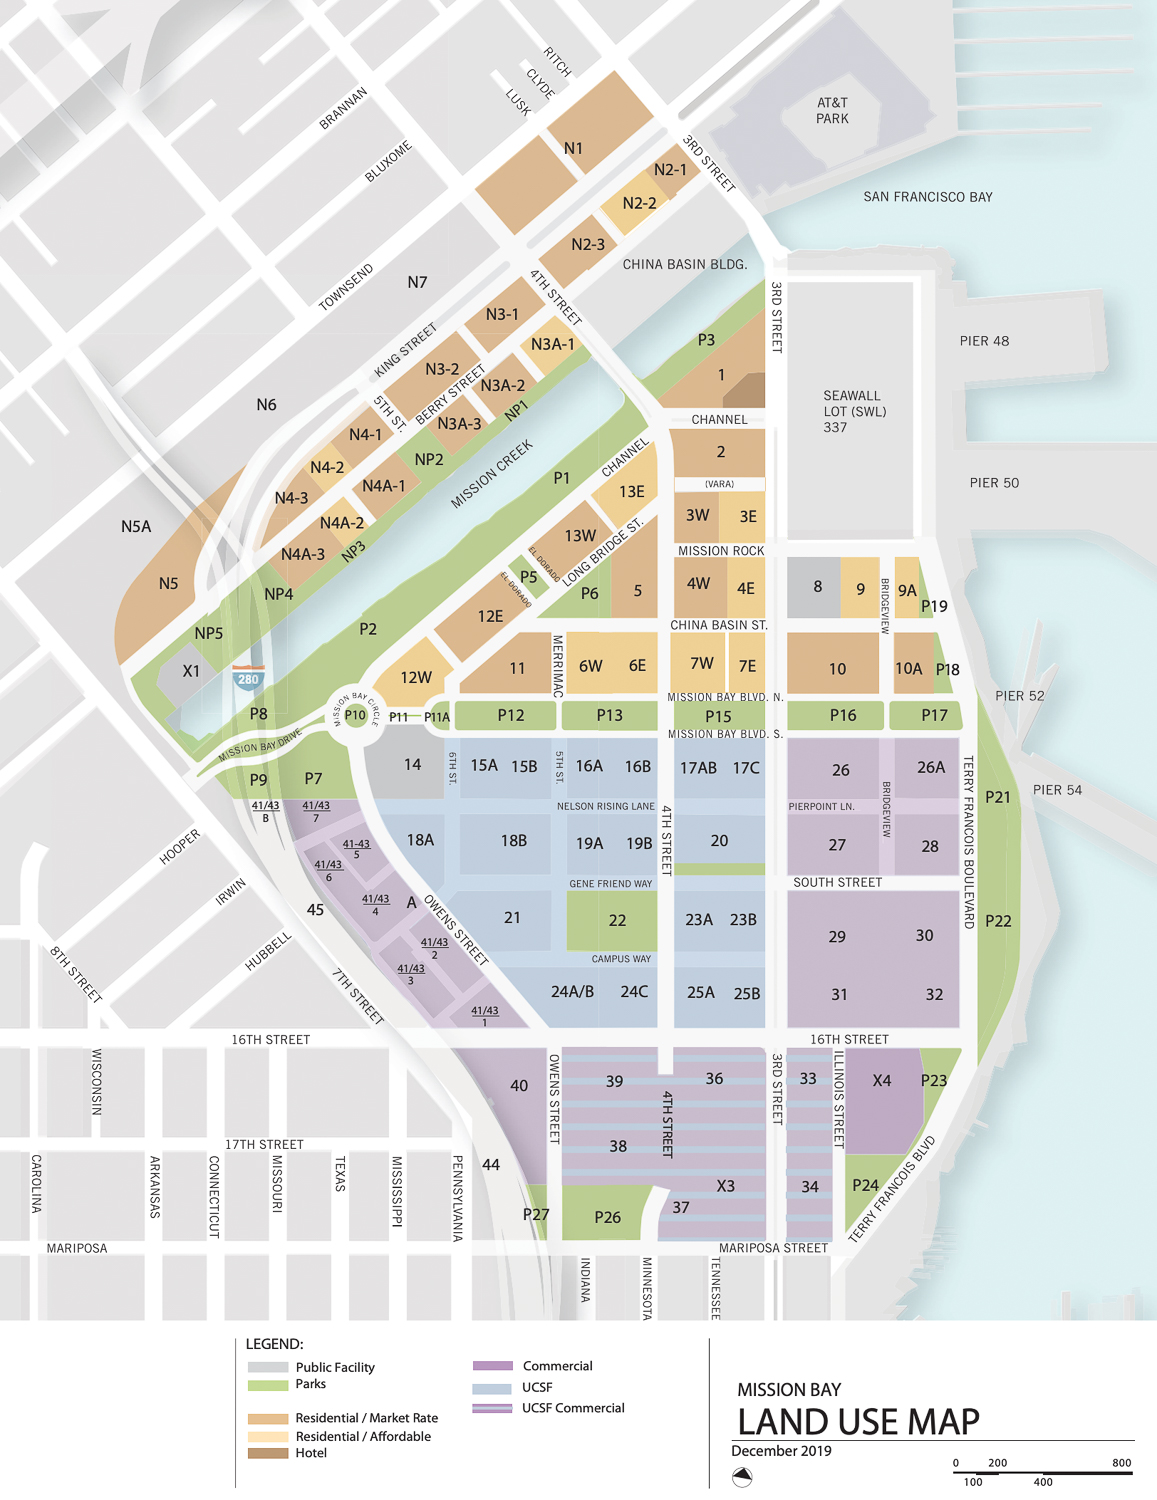 Mission Bay land use map, image from the City and County of San Francisco